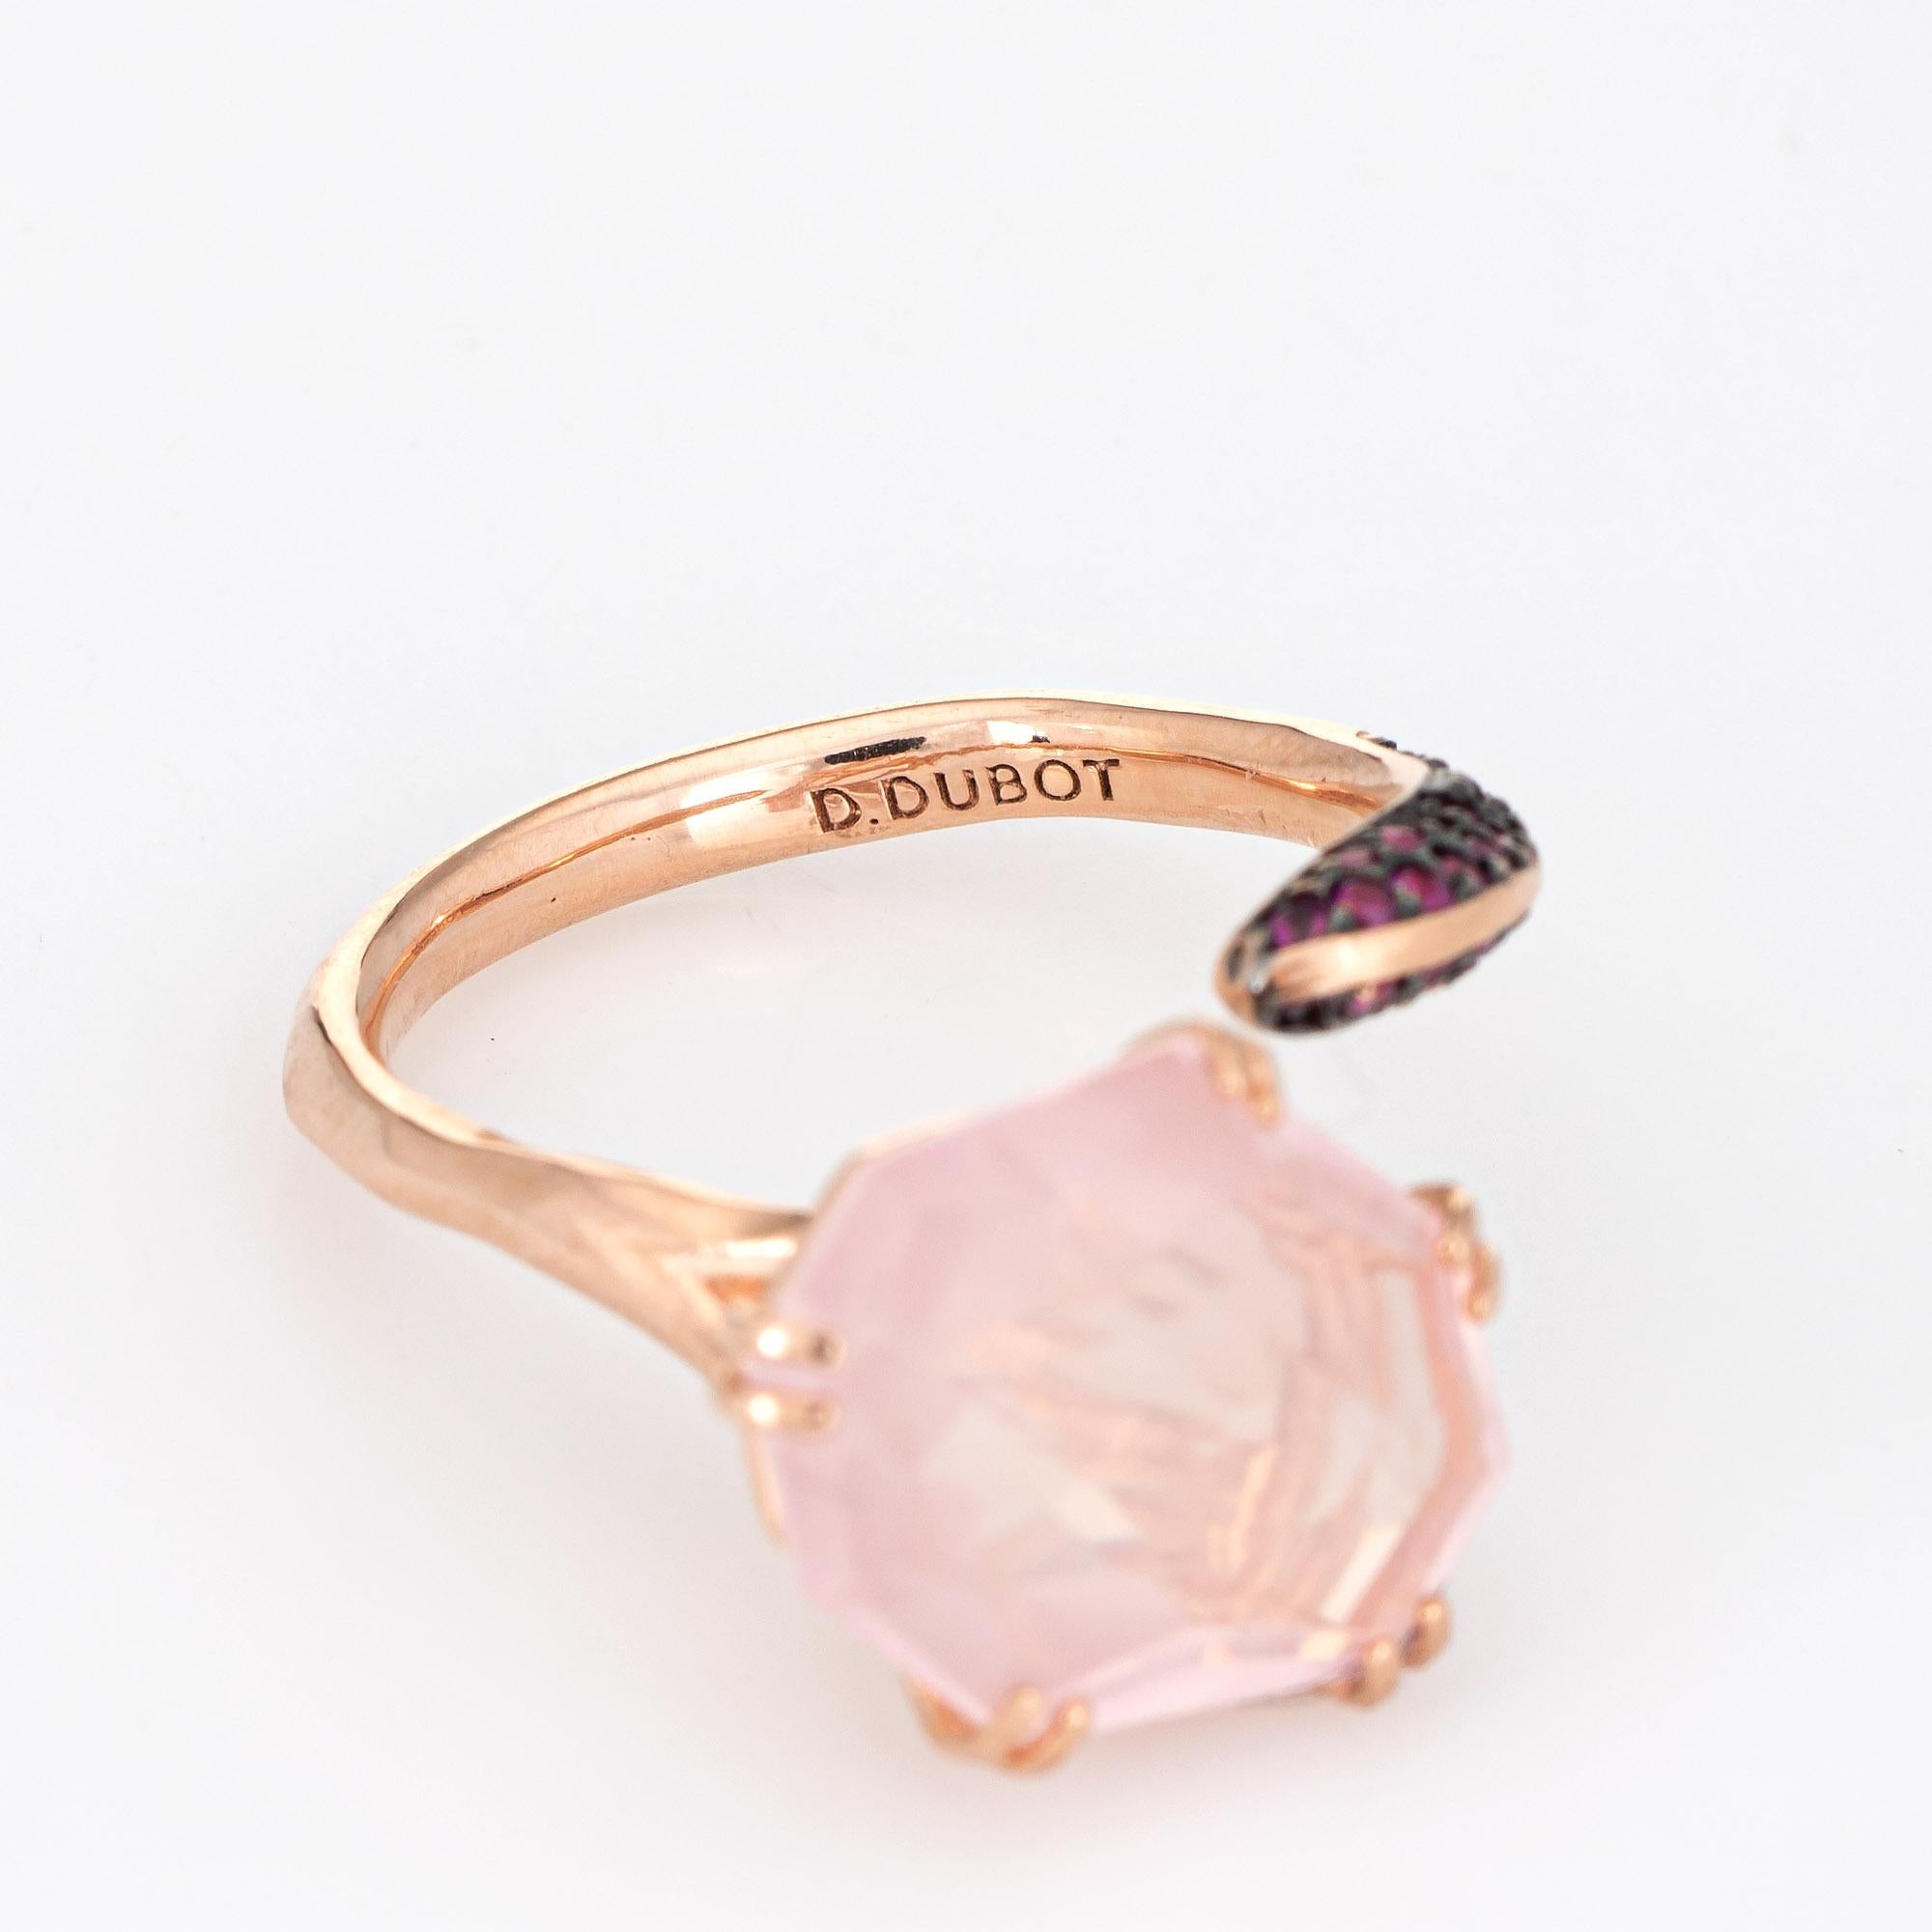 Octagon Cut Didier Dubot Rose Quartz Ruby Ring Estate 14 Karat Gold Abstract Korea Jewelry For Sale